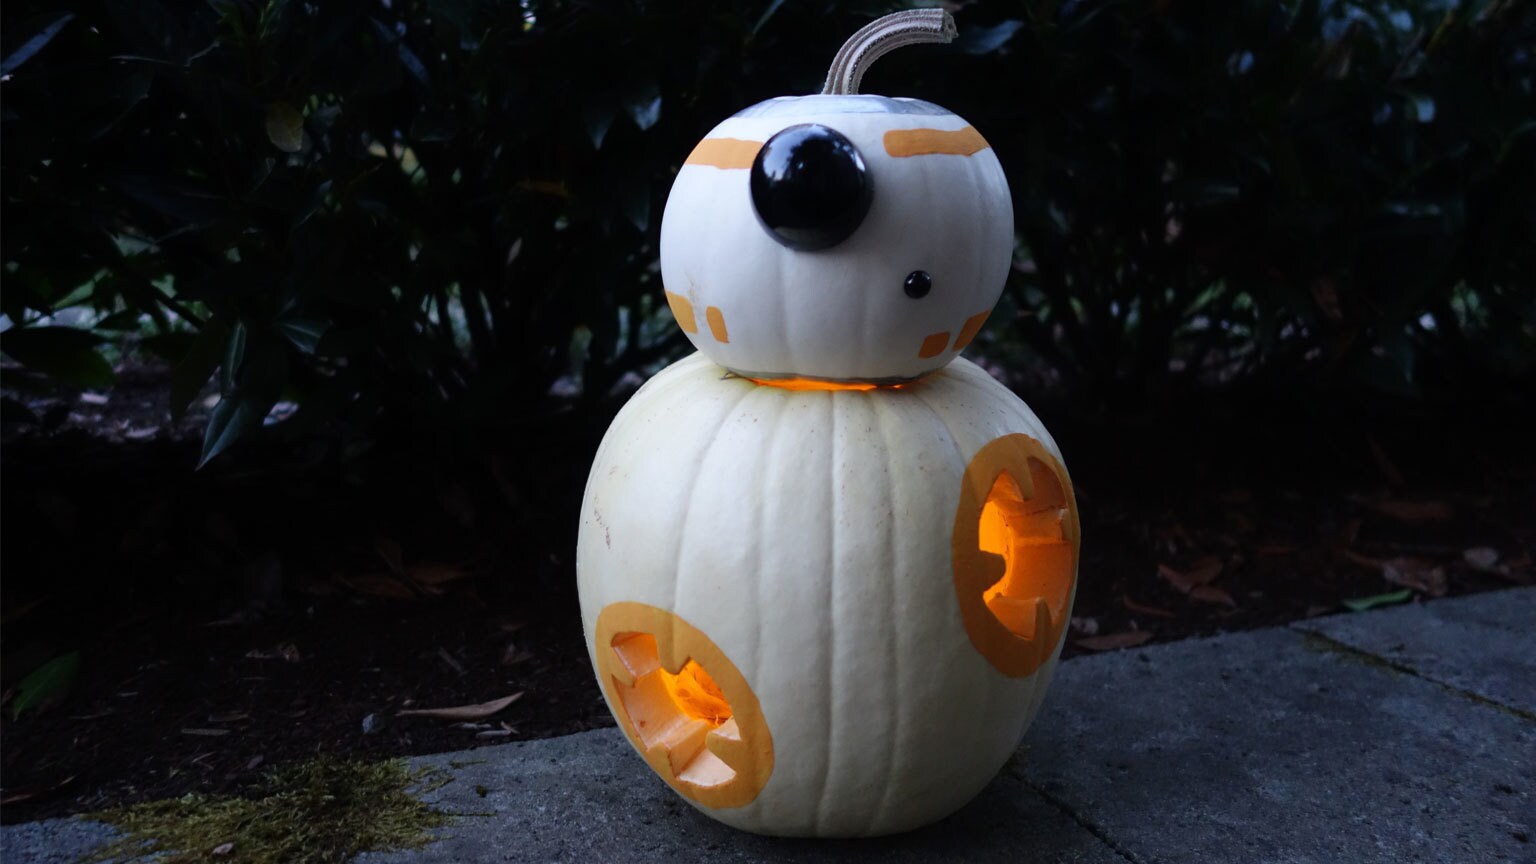 Get a Thumbs-Up from Trick-Or-Treaters with This BB-8-O’-Lantern